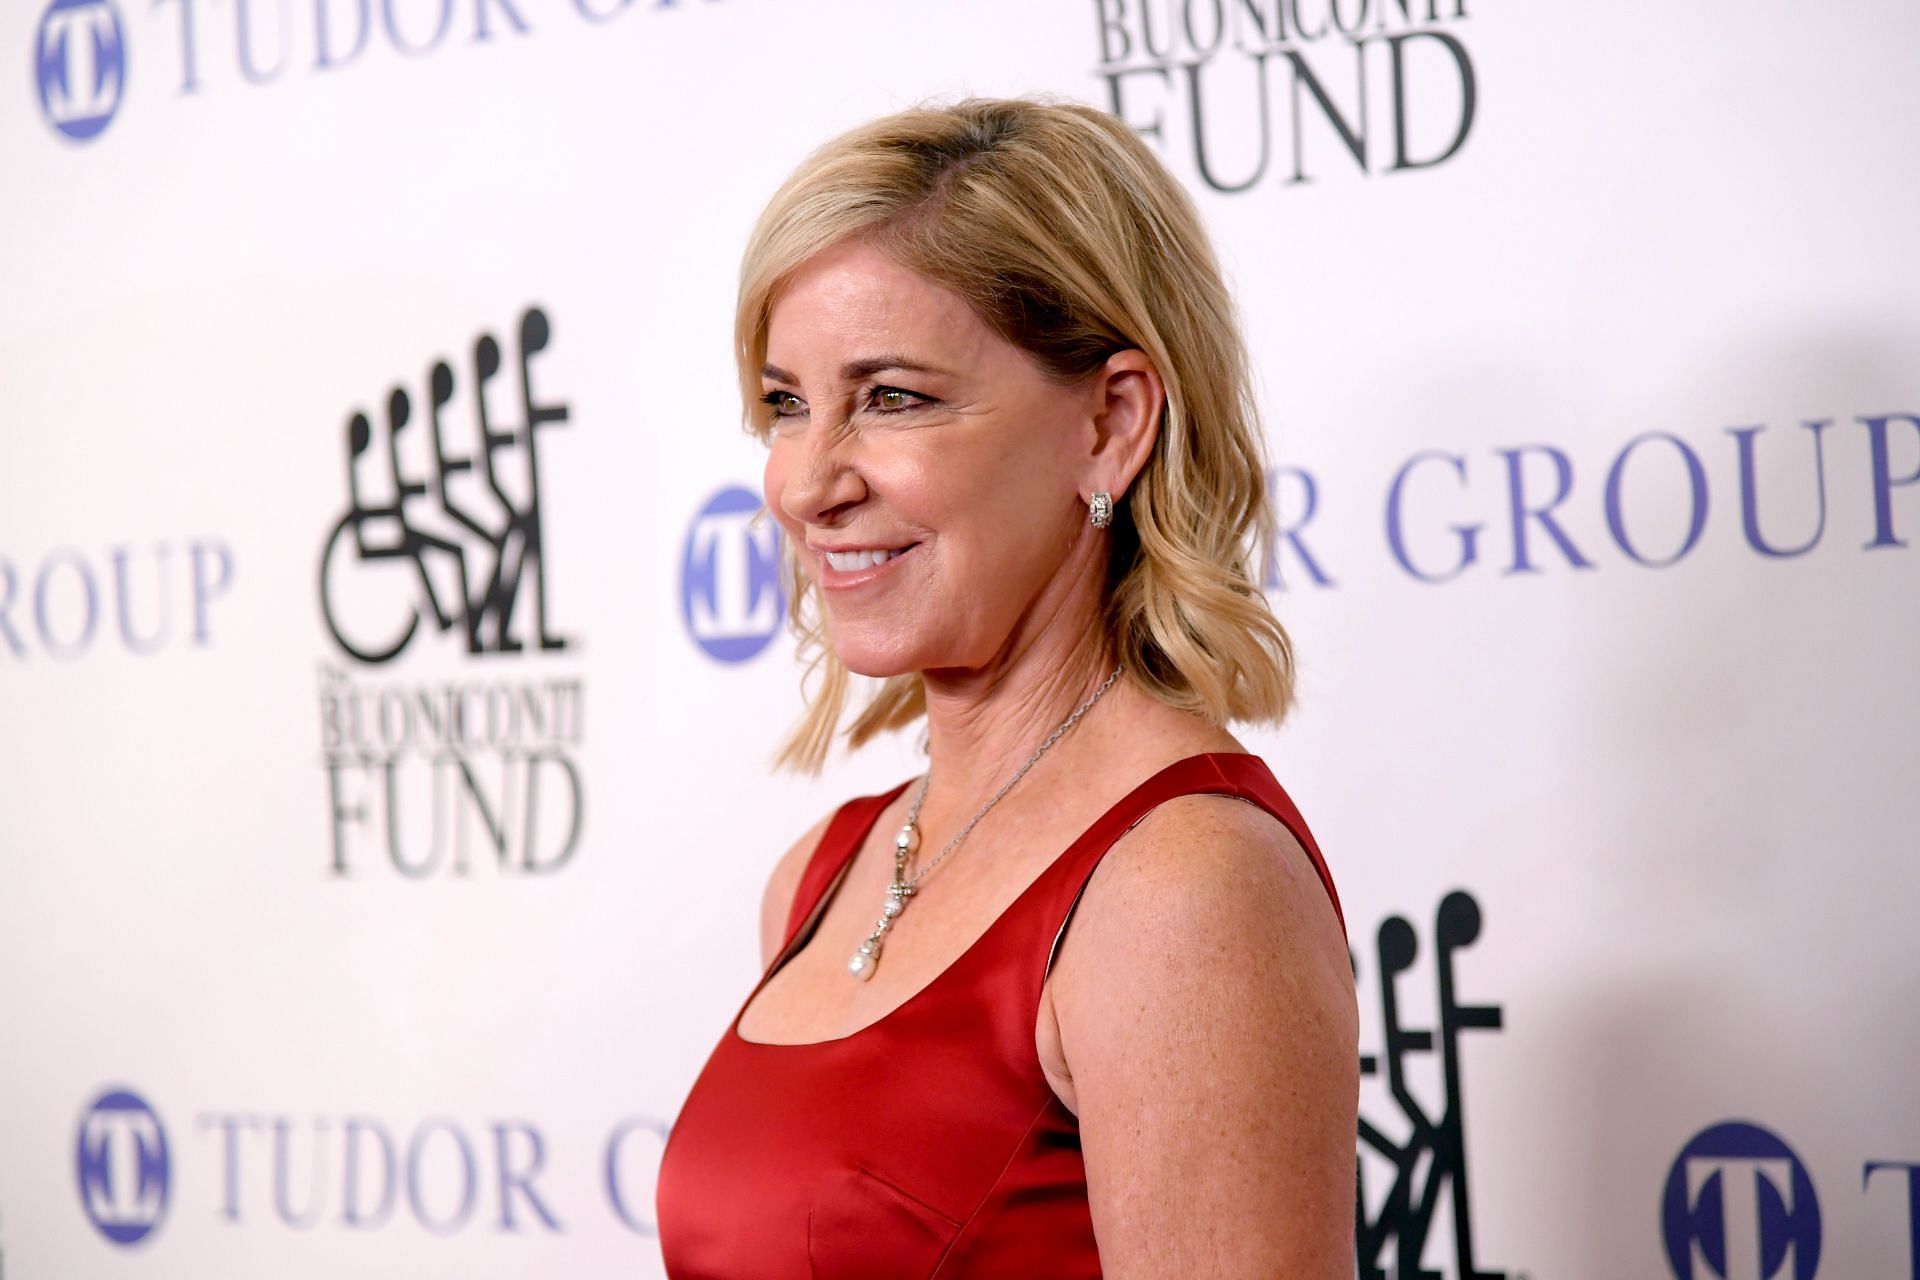 Chris Evert at the 33rd Annual Great Sports Legends Dinner - Getty Images